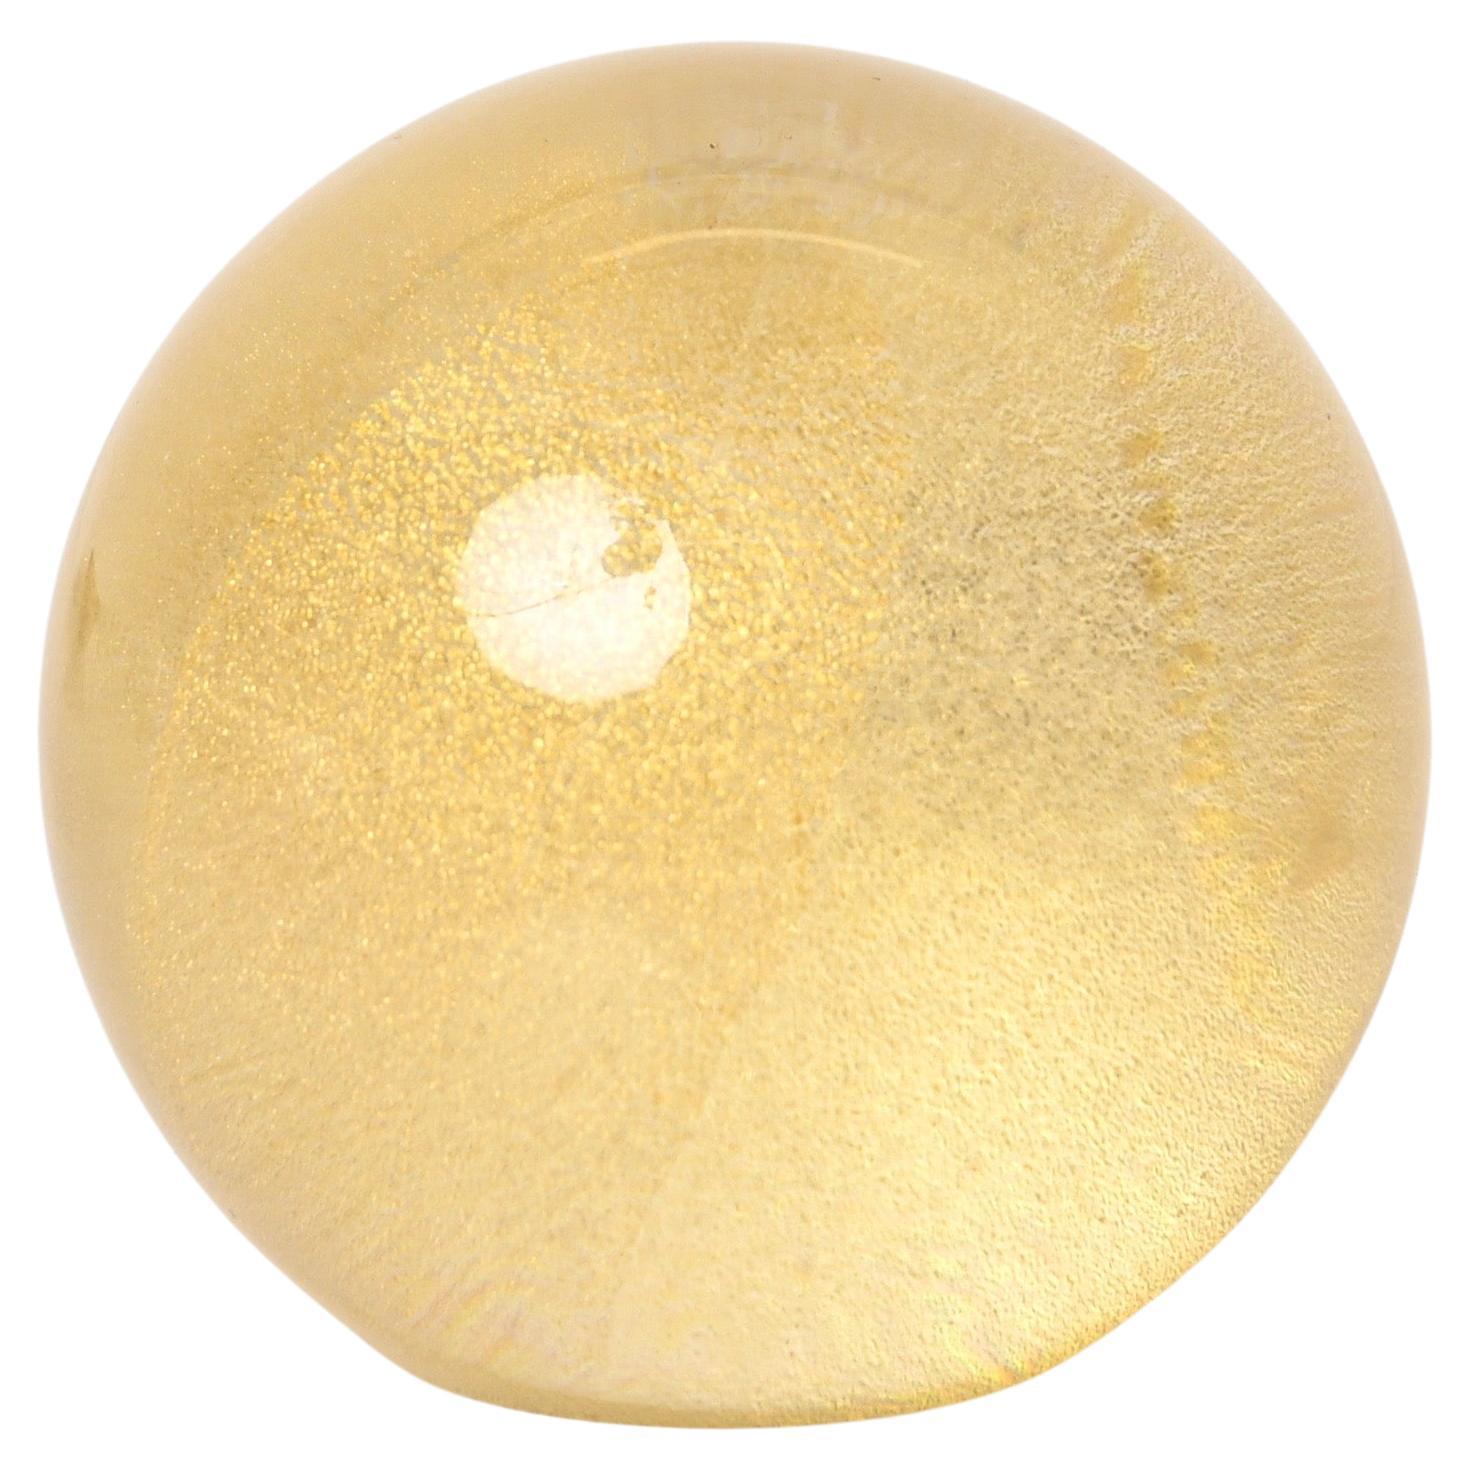 Seguso Spherical Paperweight in Murano Glass with Gold Dust, Italy 1950s